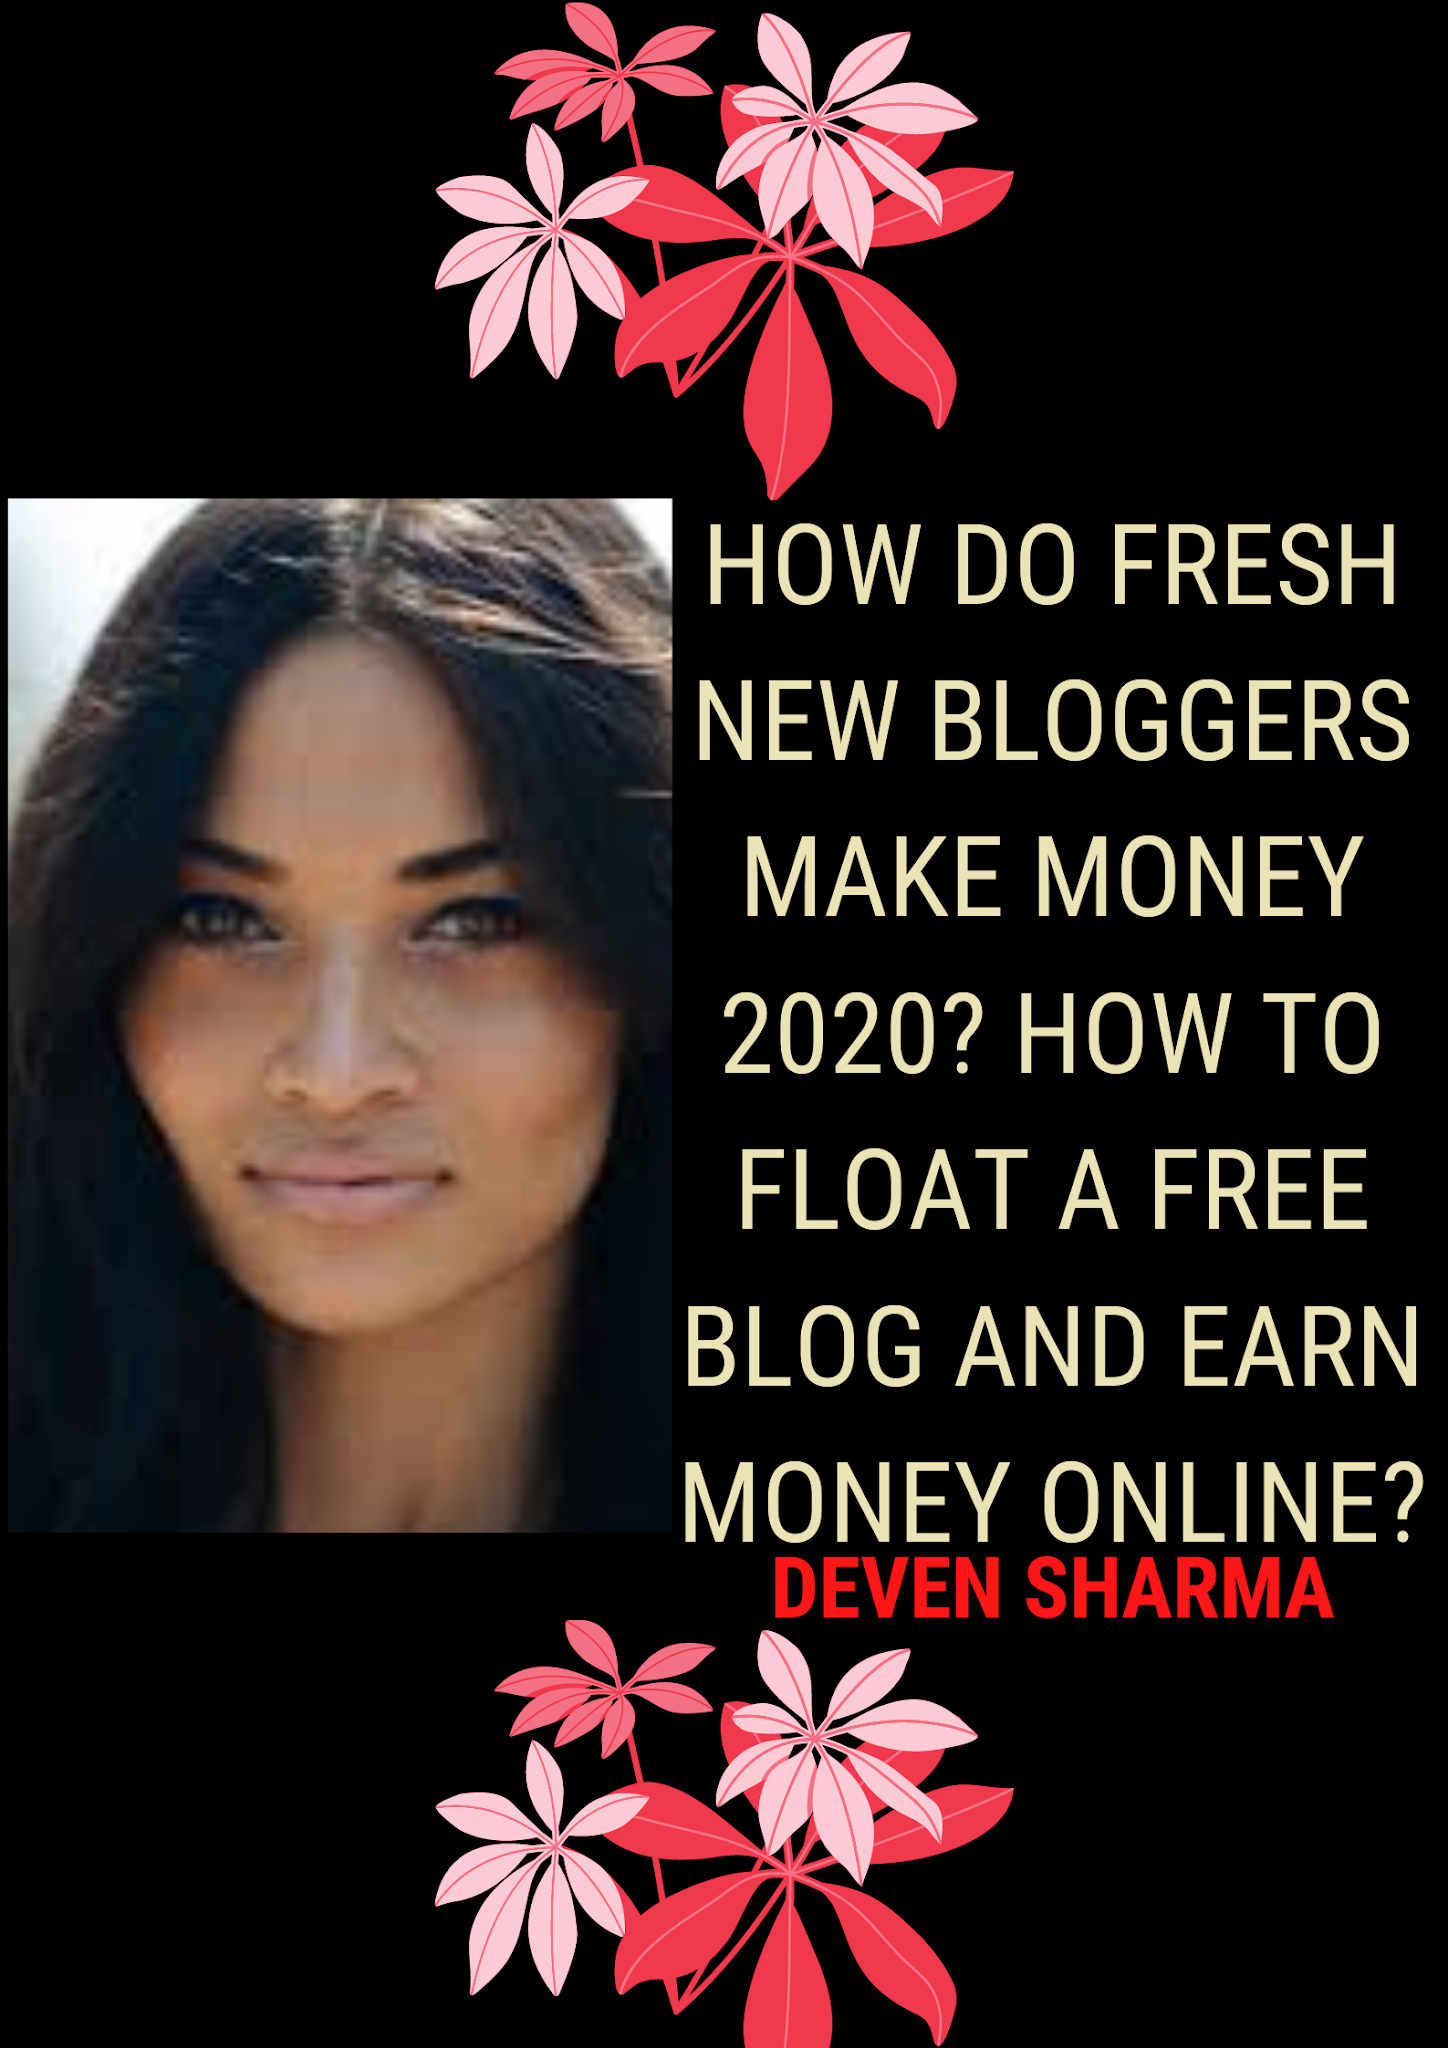 How Do Fresh New Bloggers Make Money 2020 What Are Ways To Make Money By Blogging How To Float A Free Blog And Earn Money Online Ways To Monetize Your Blog And